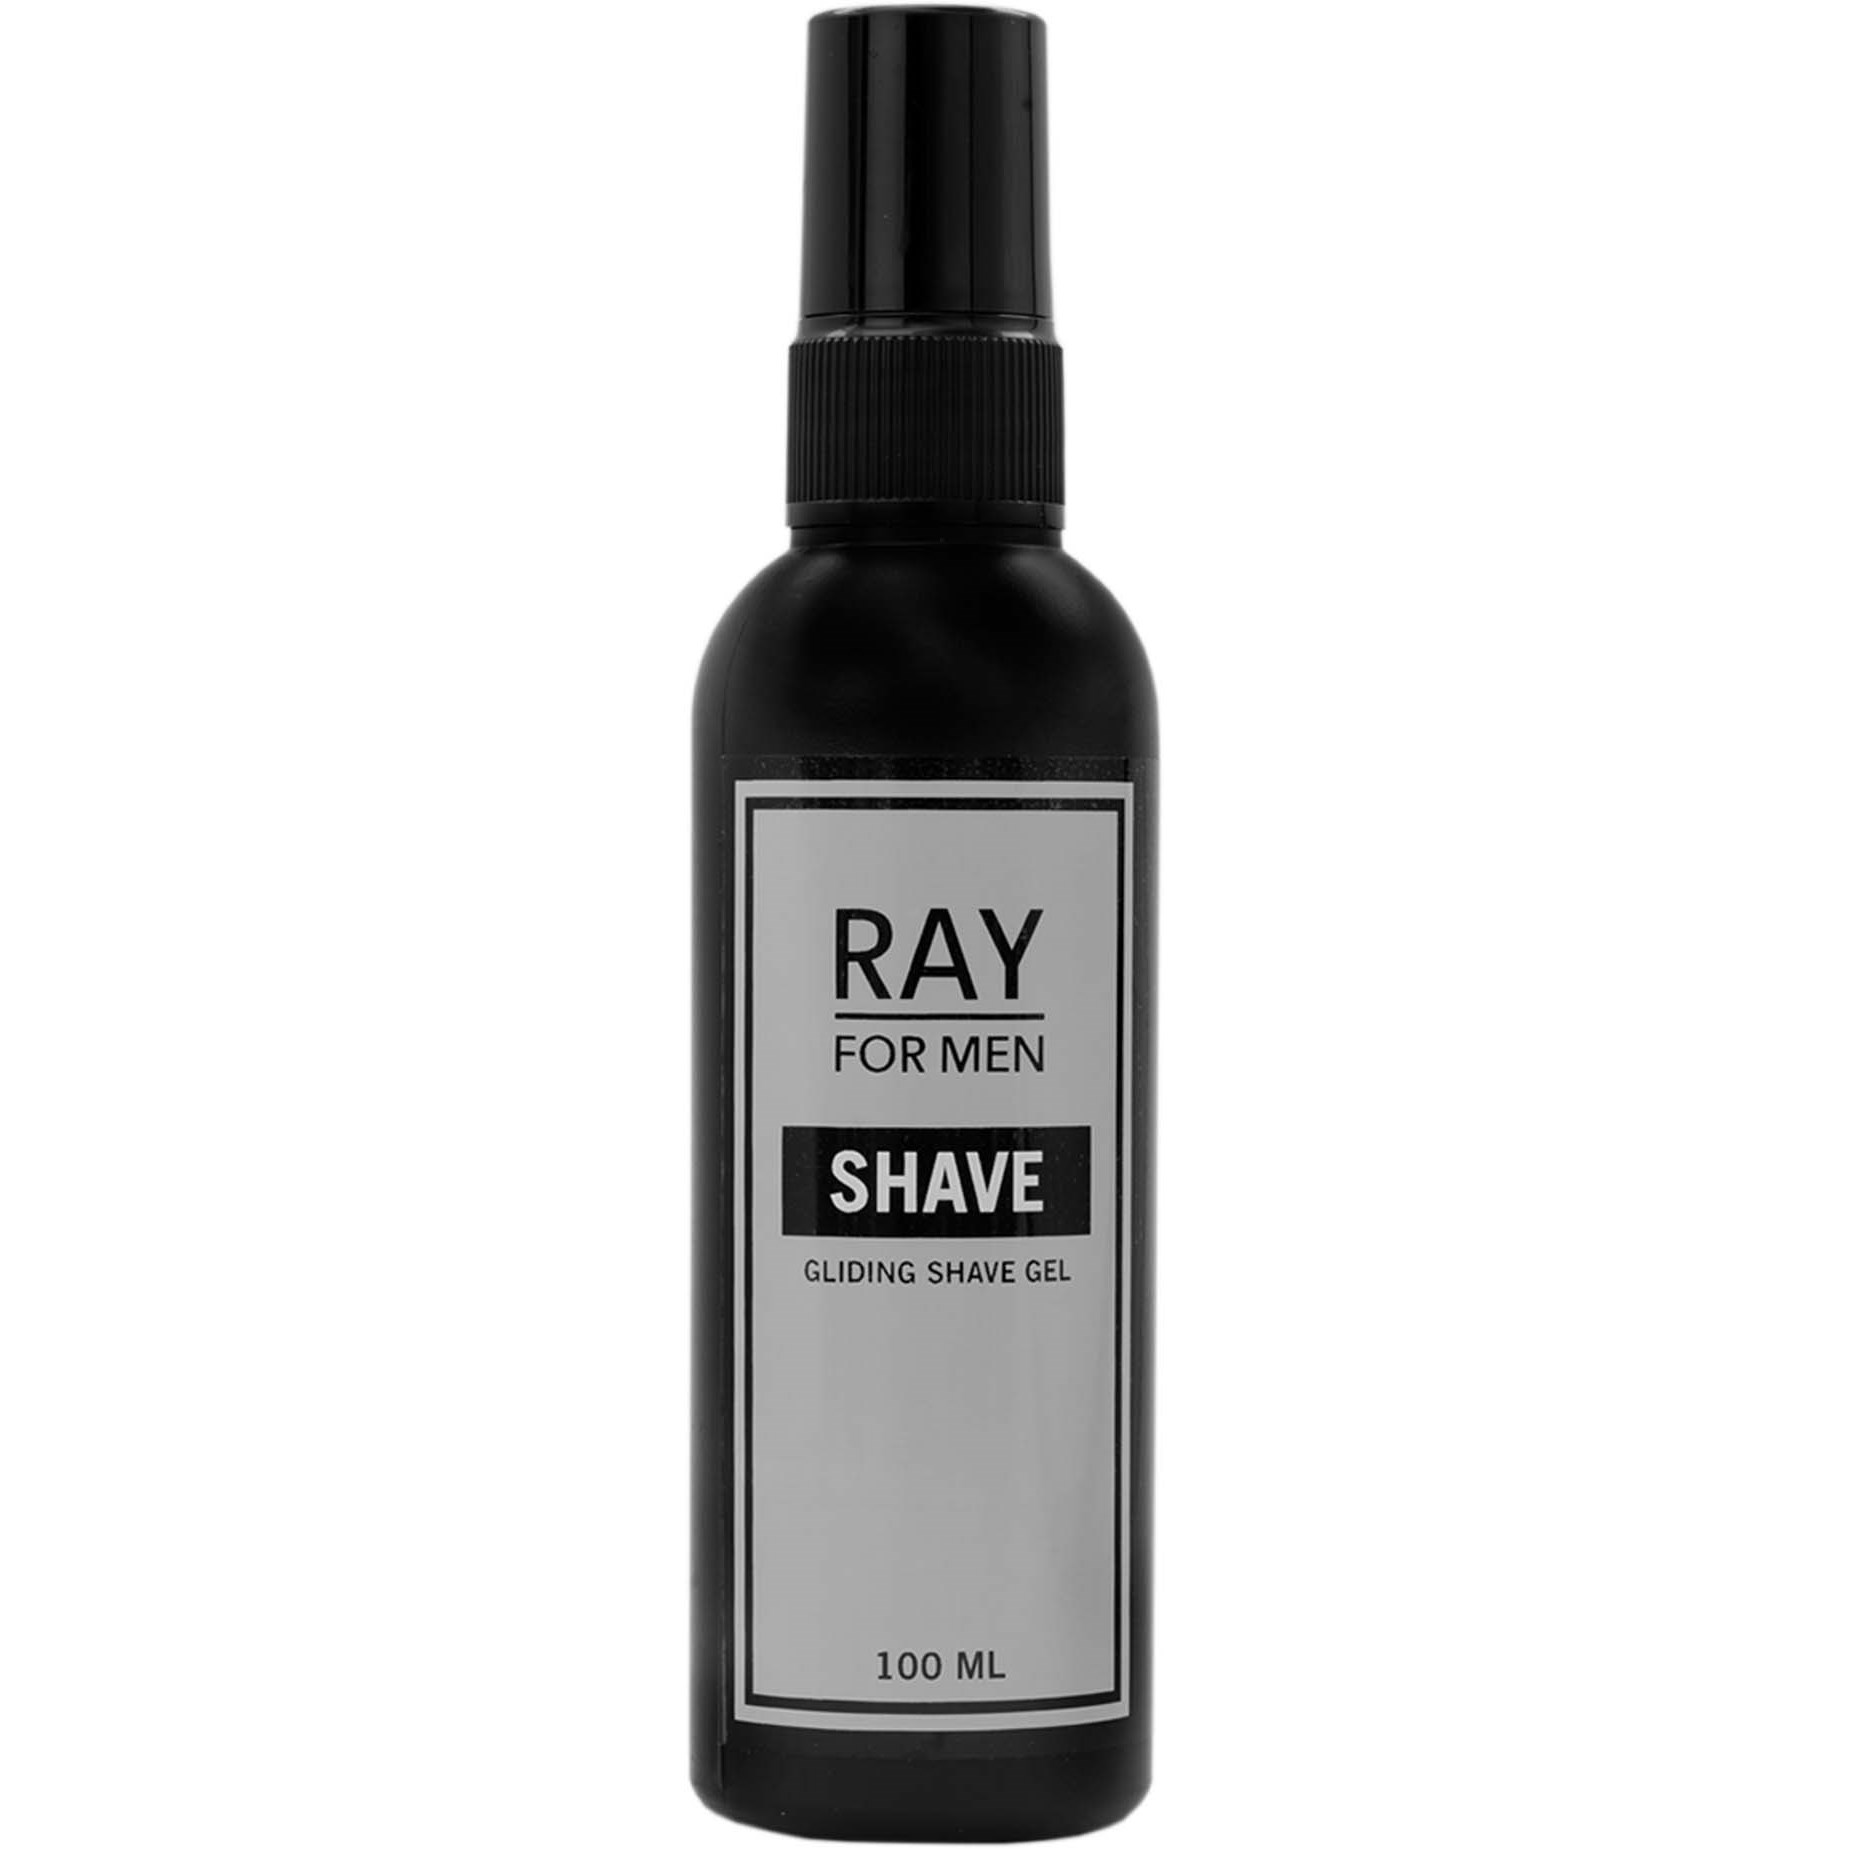 RAY FOR MEN Shave 100 ml